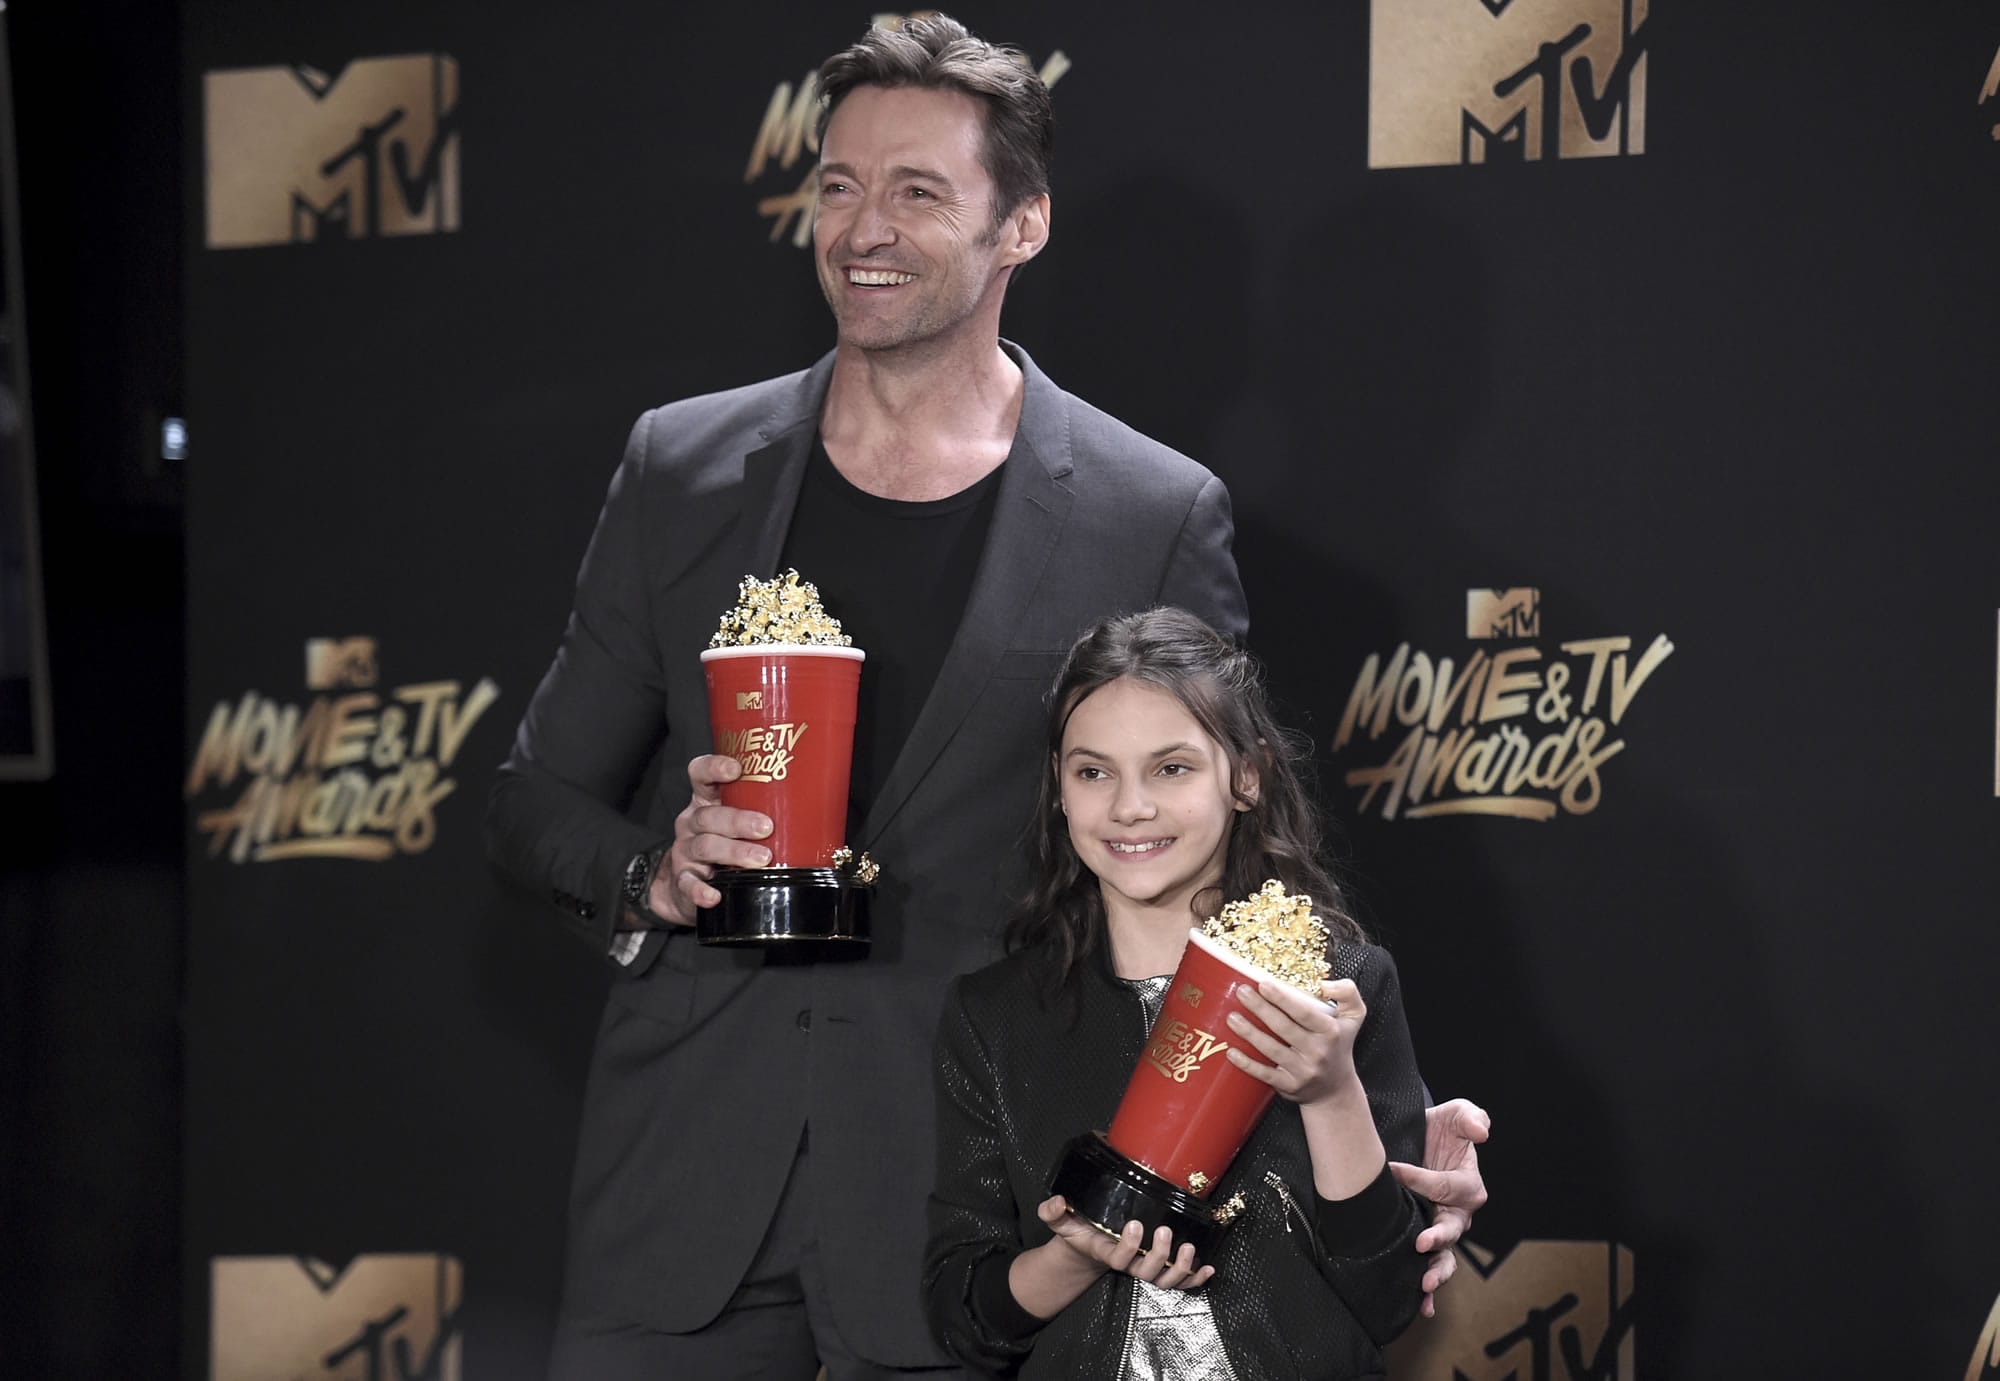 Hugh Jackman, left, and Dafne Keen pose with their awards for best duo for "Logan" in the press room at the MTV Movie and TV Awards at the Shrine Auditorium on Sunday, May 7, 2017, in Los Angeles.